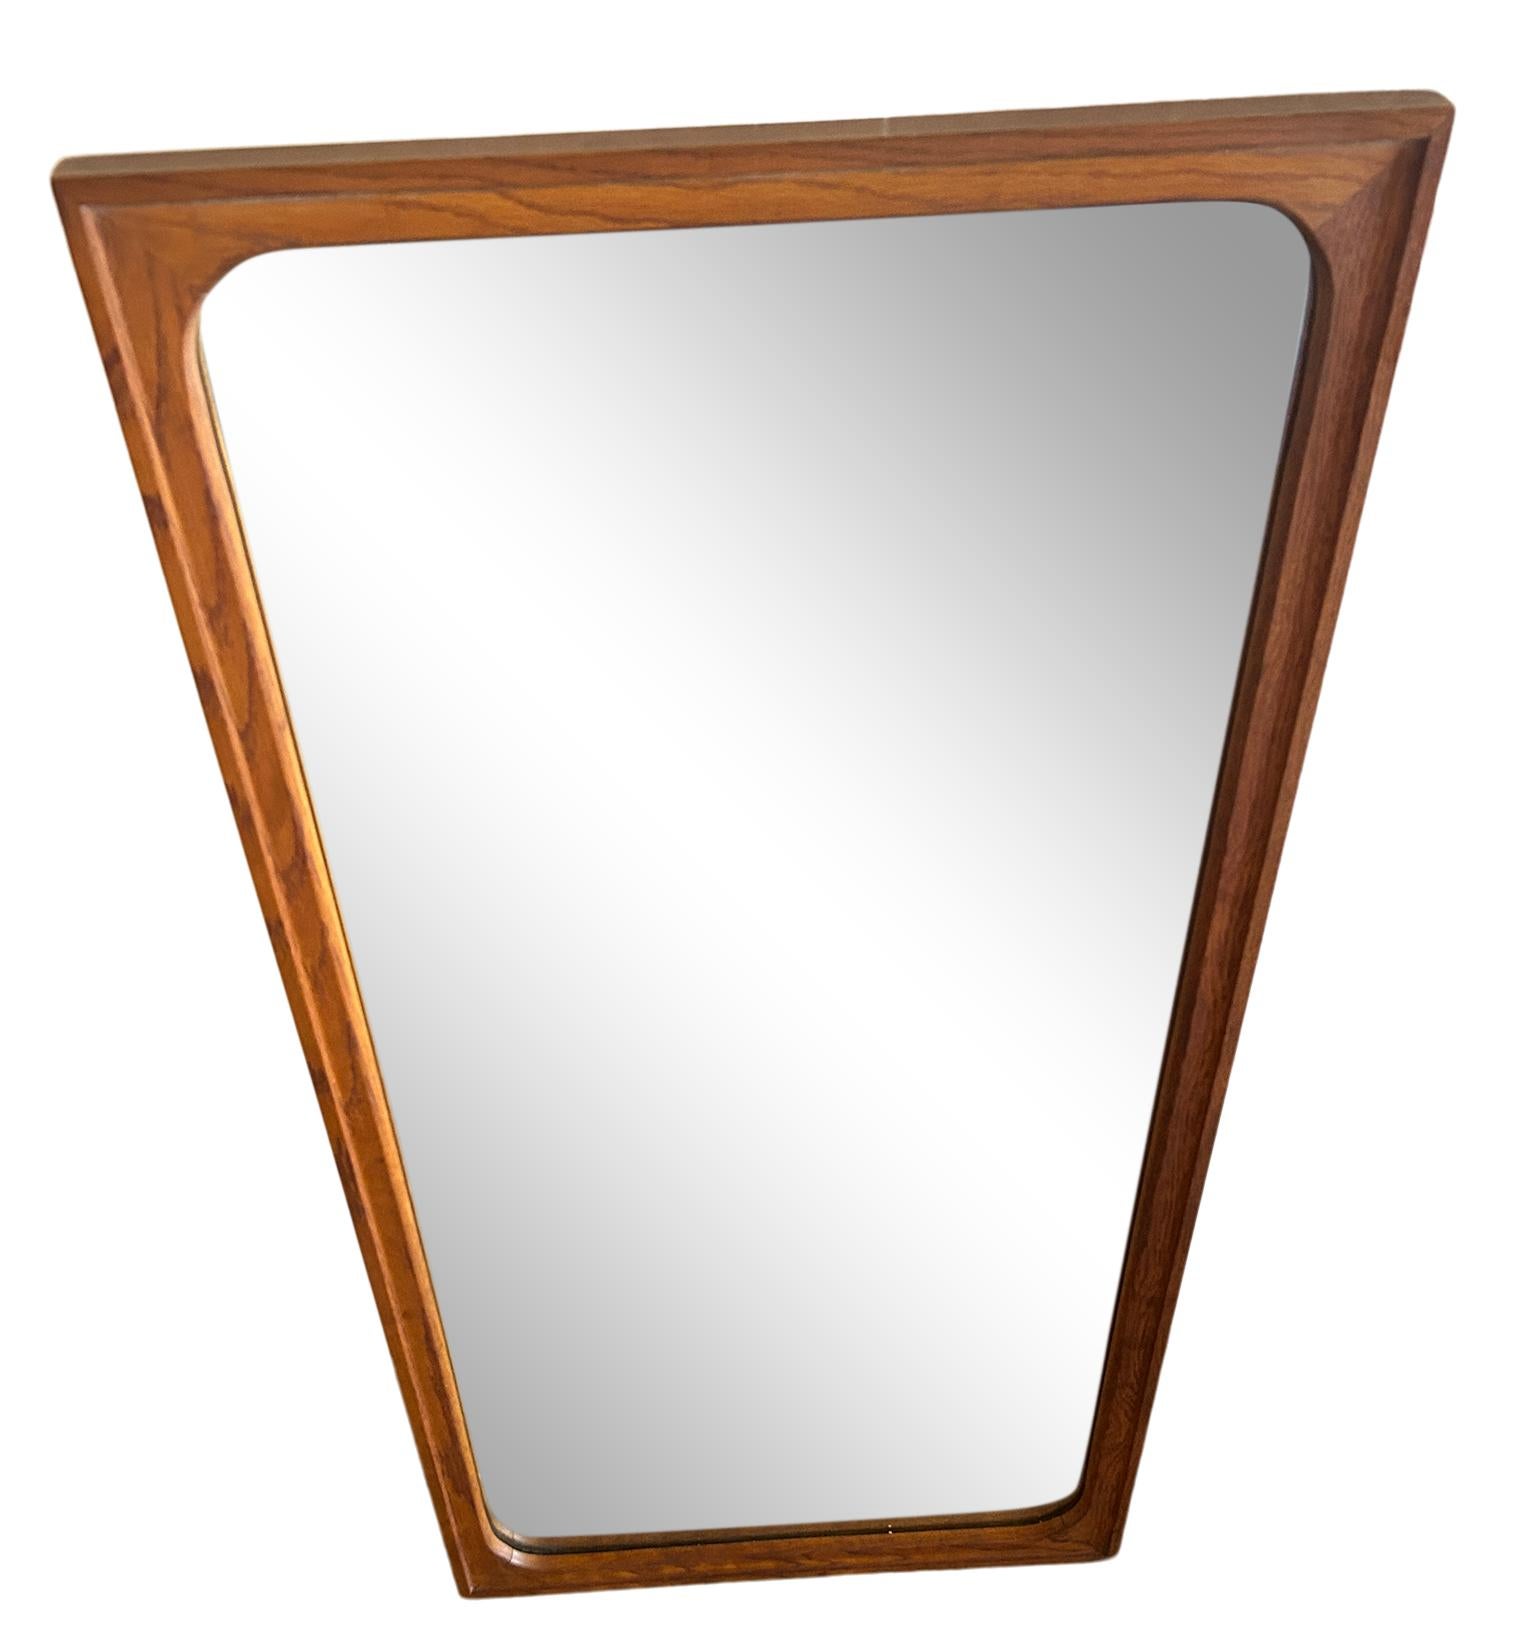 Mid-Century Modern solid walnut framed wall mirror with curved details on inside corners. Currently wired ready for use vertically. Rectangle mirror frame. Wood backing very good construction. Made in USA. Located in Brooklyn.

Measures 44” x 22” x